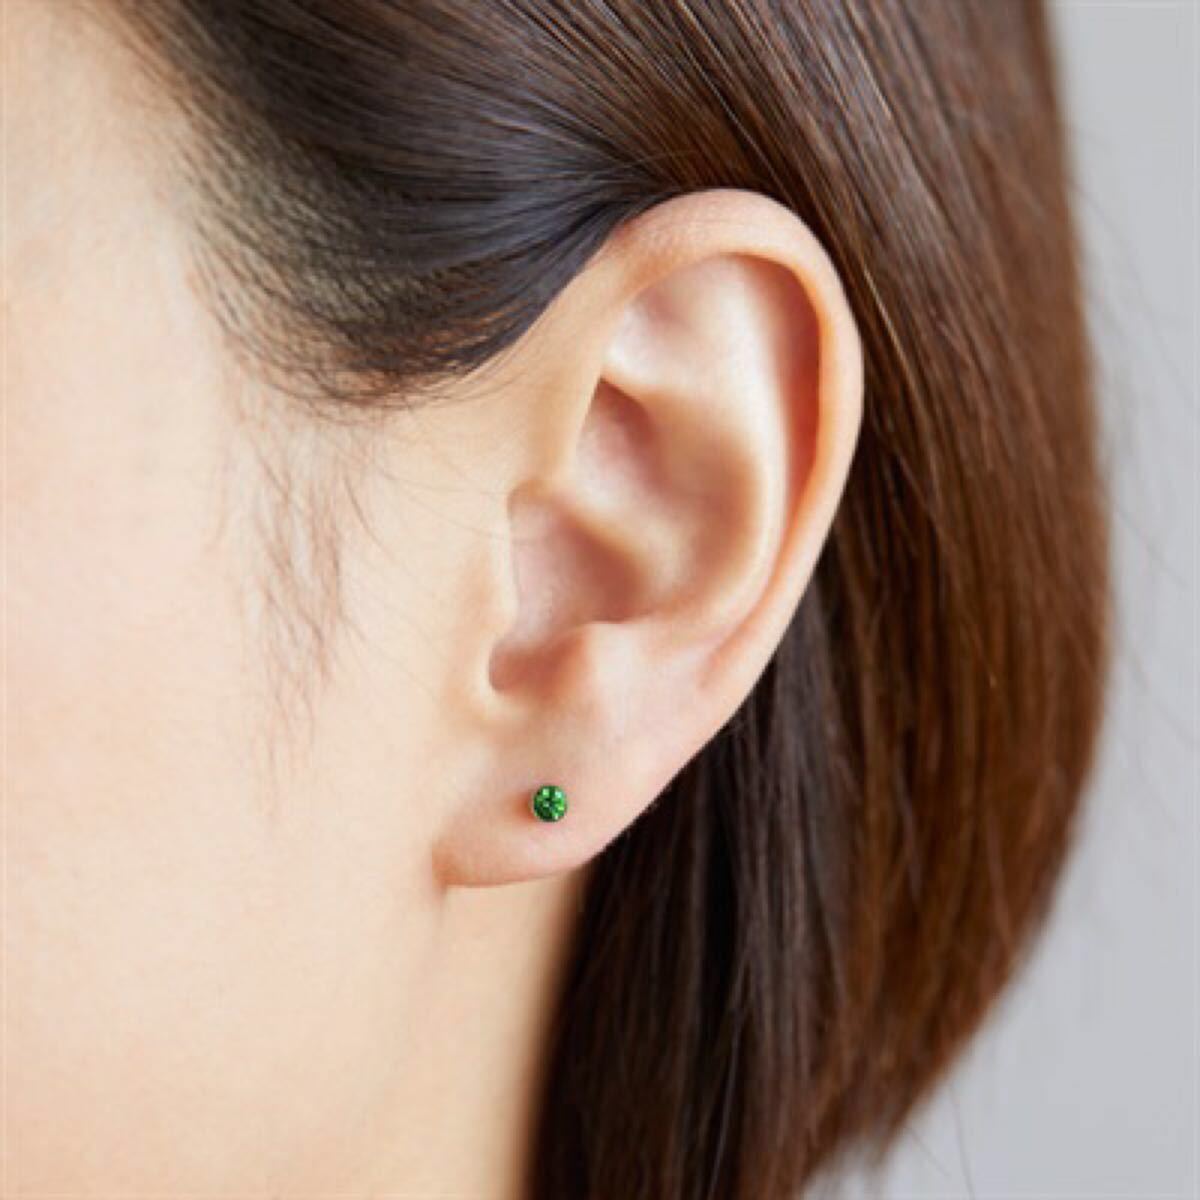 PayPayフリマ｜新品 ピアス Baqless(バックレス)Clarity Green 3mm